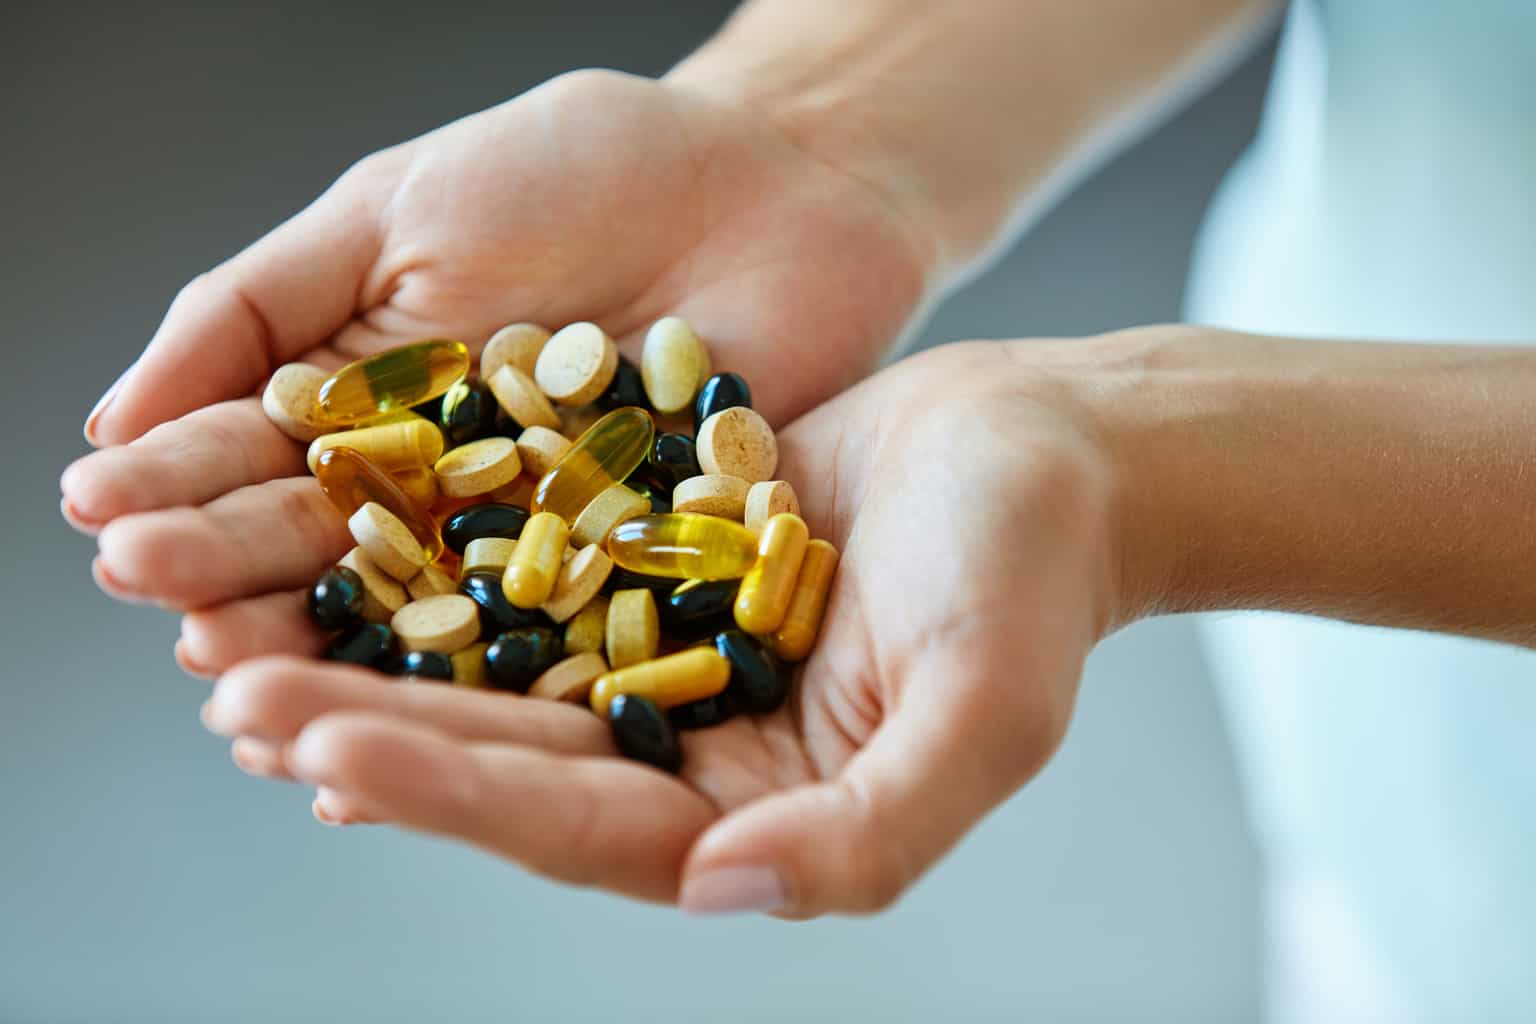 One of the most controversial “essential” vitamins